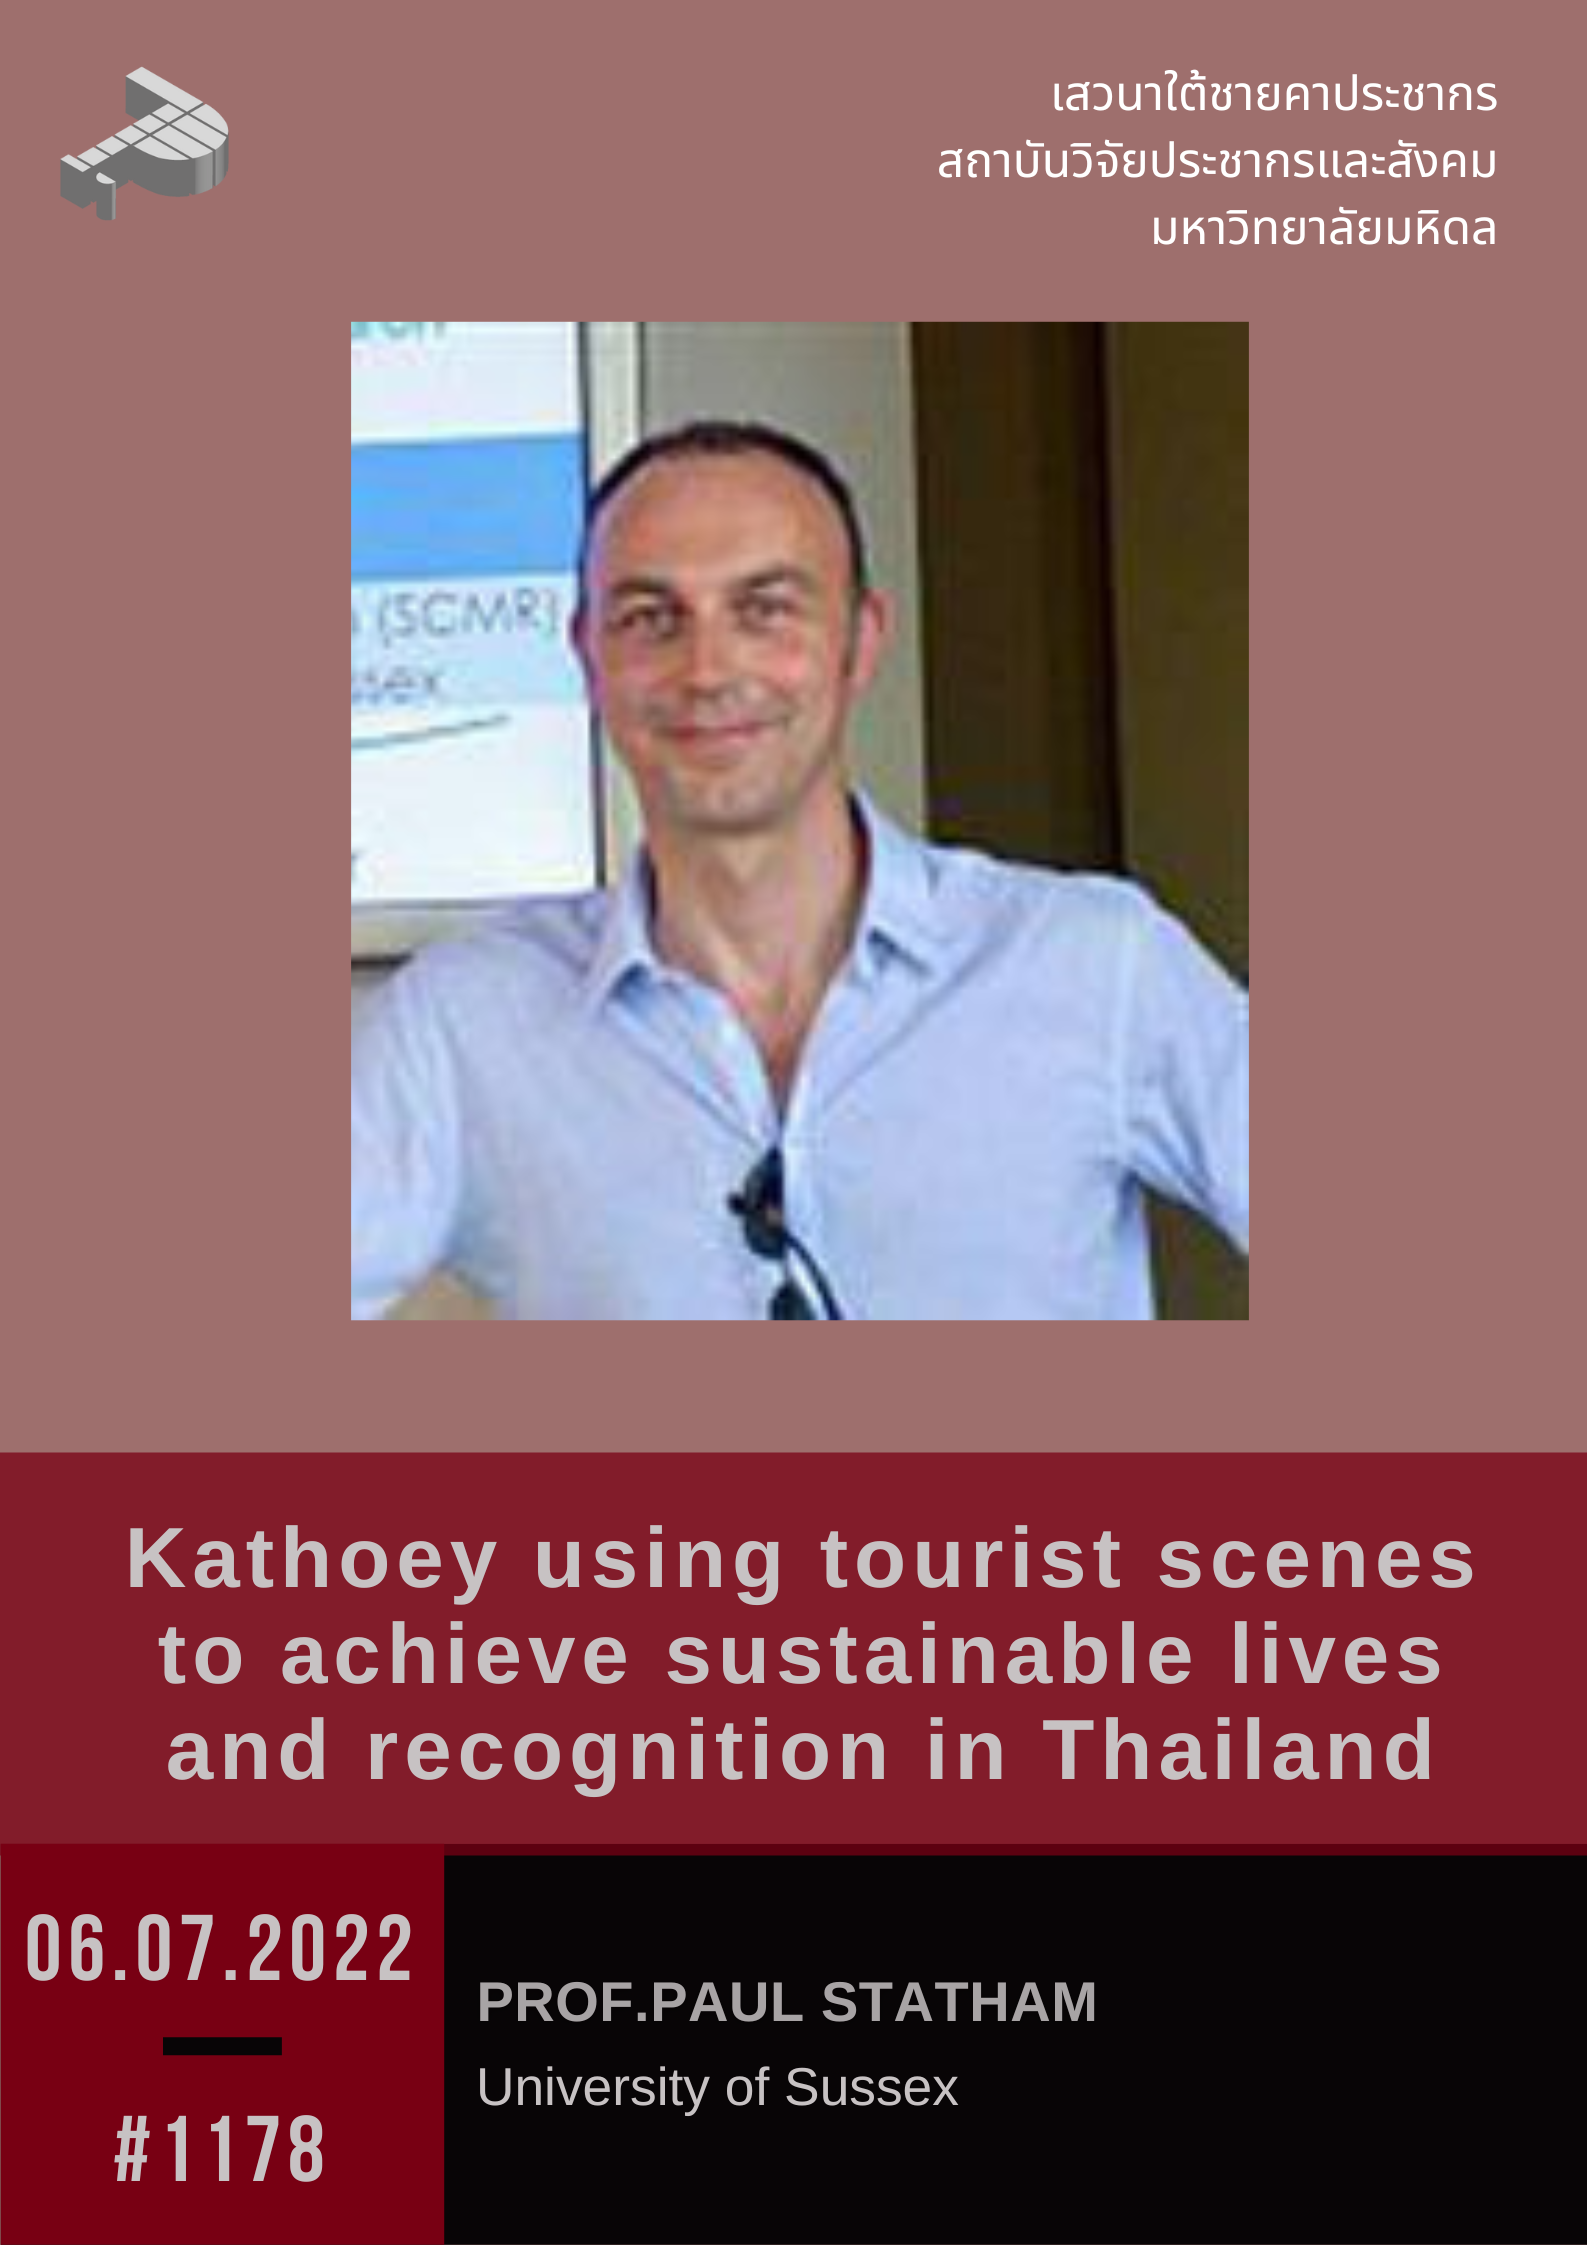 Kathoey using tourist scenes to achieve sustainable lives and recognition in Thailand